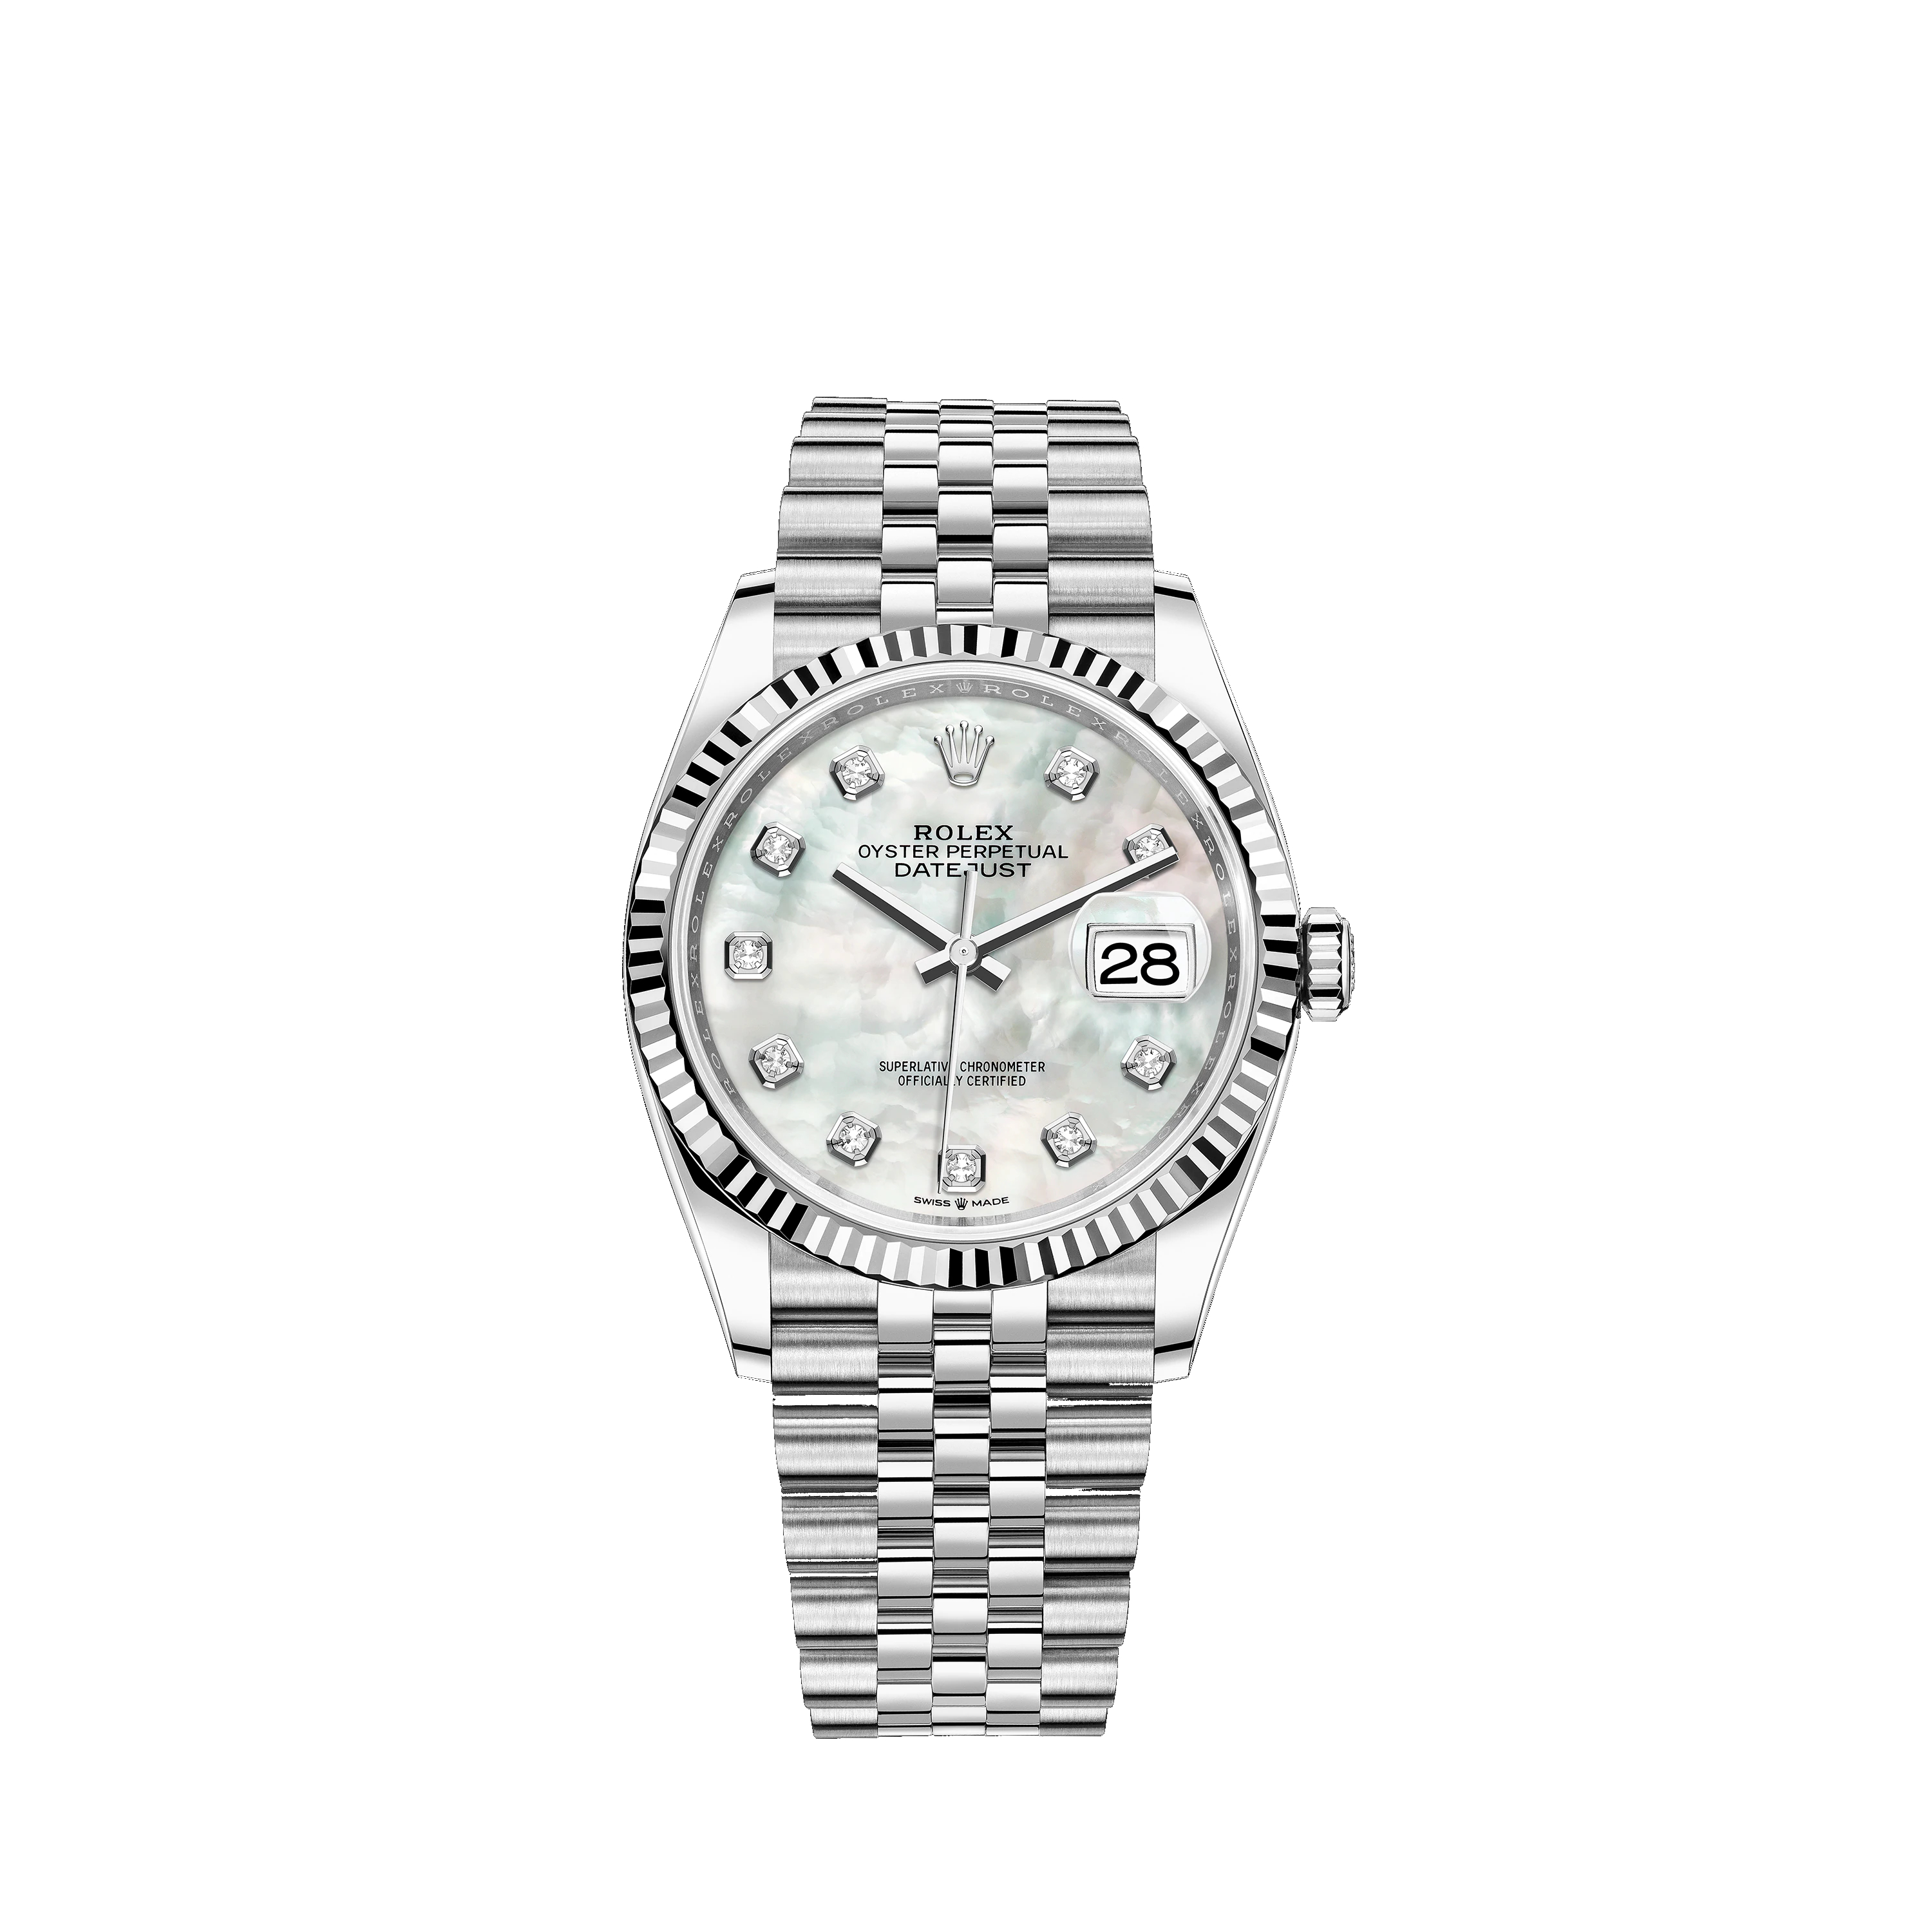 Datejust 36 126234 White Gold & Stainless Steel Watch (White Mother-of-Pearl Set with Diamonds)